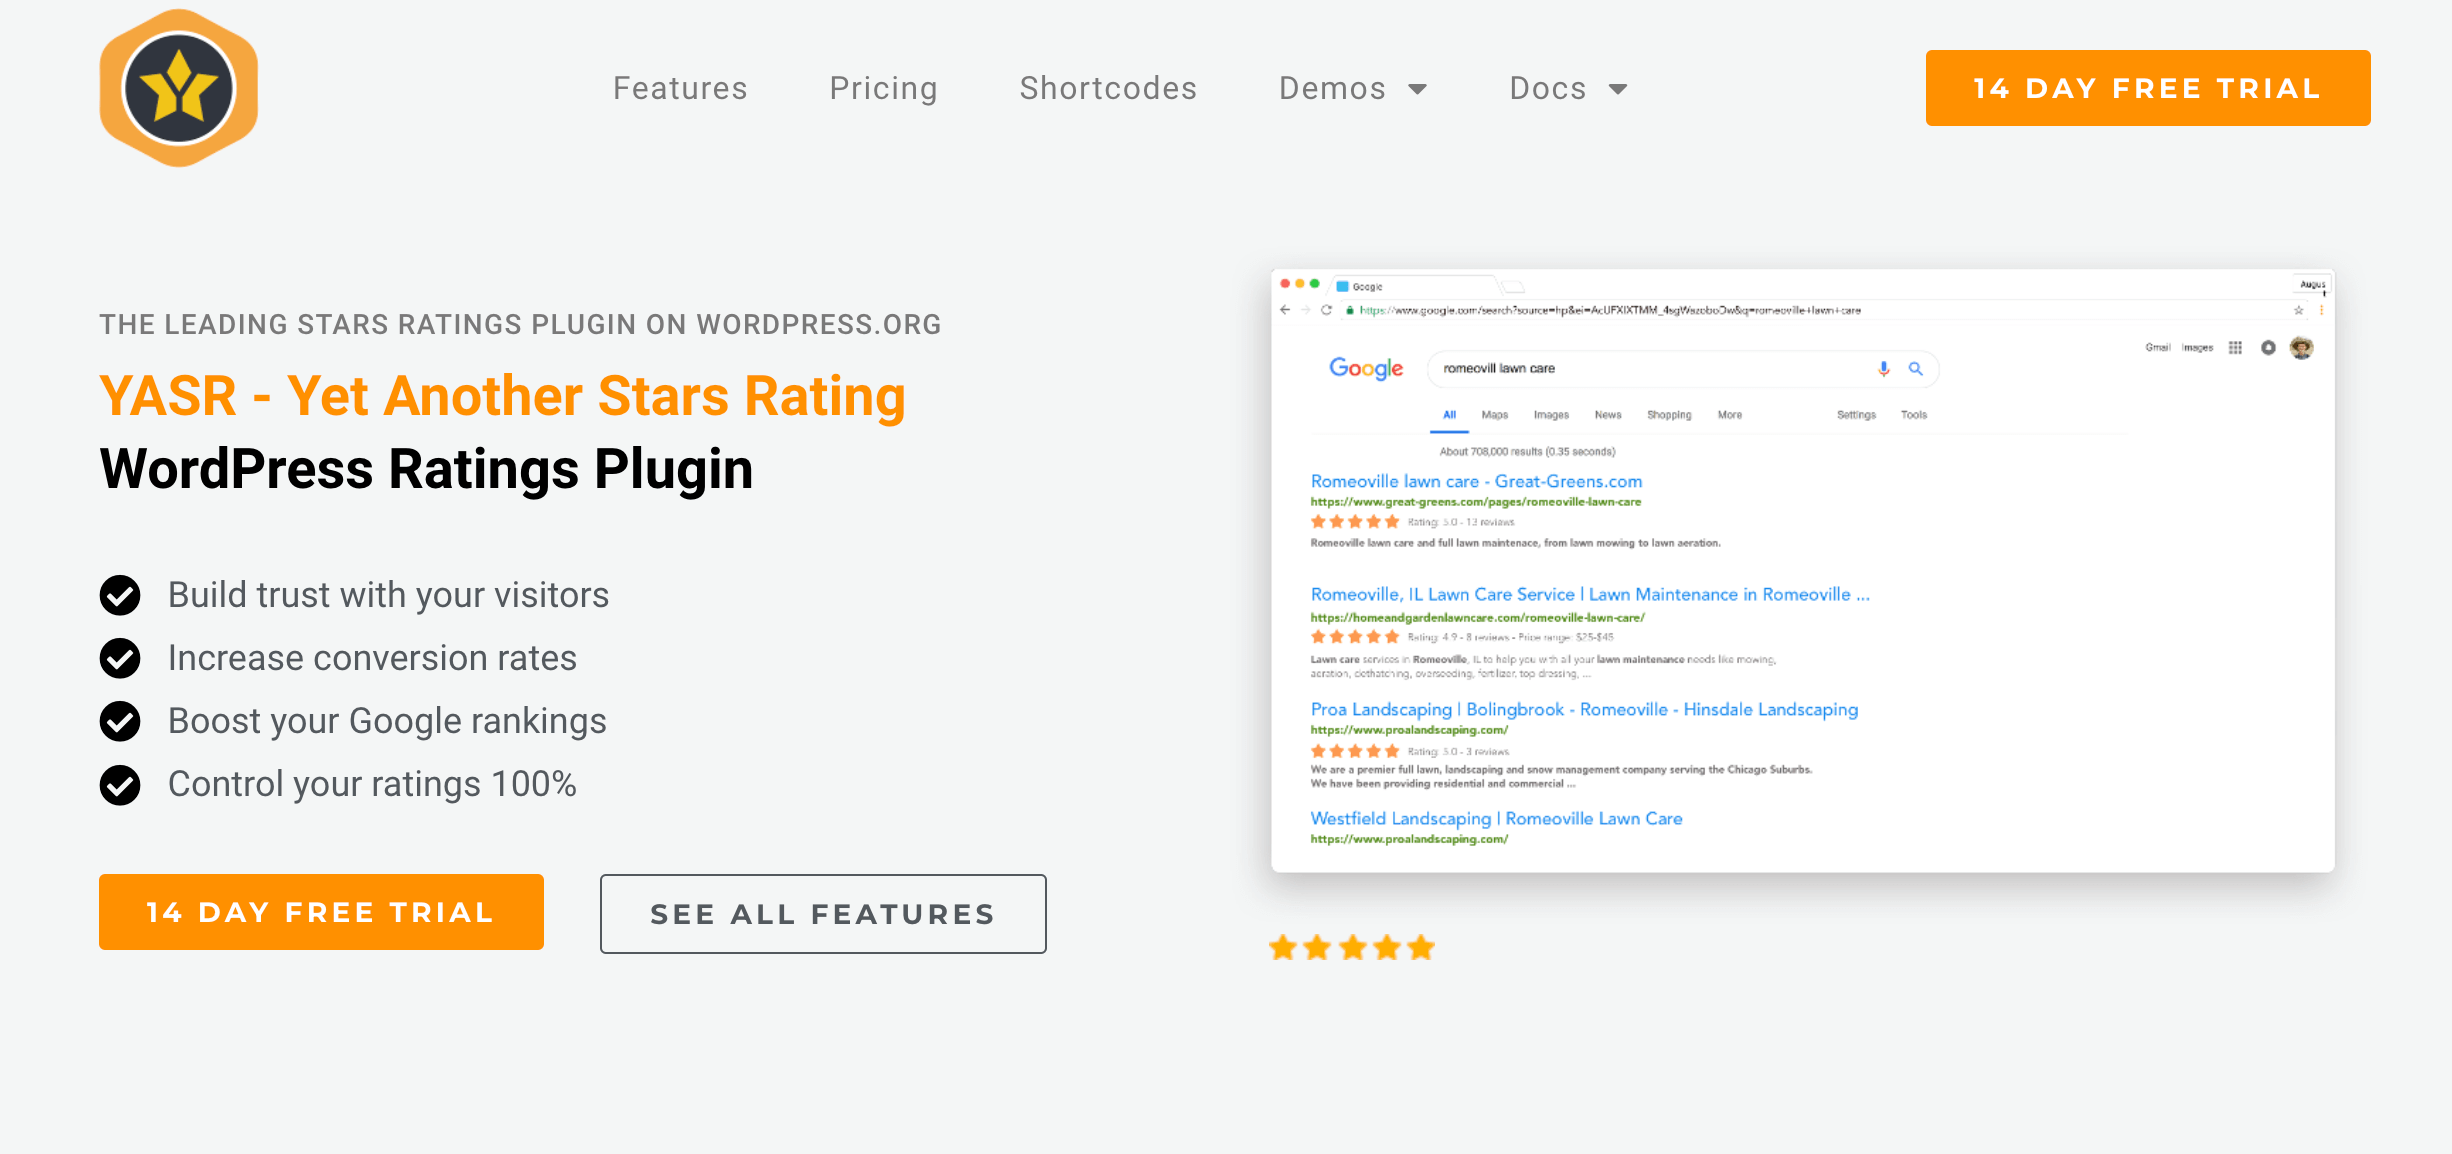 Yet Another Stars Rating homepage